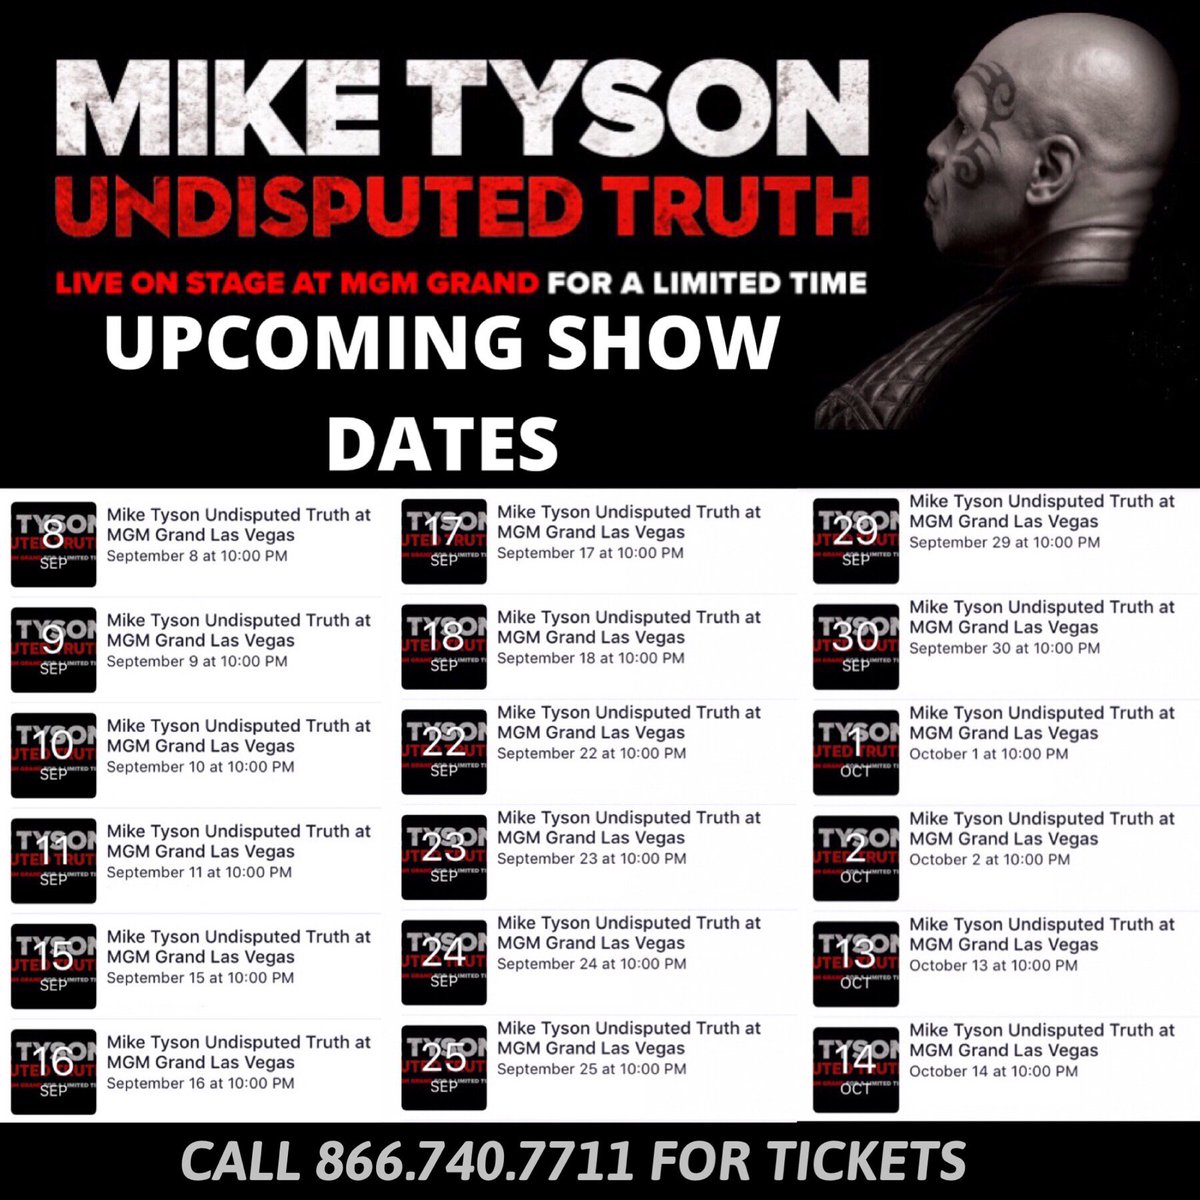 #Subscribe to the #MikeTyson #UndisputedTruth events page on #Facebook to learn new dates. https://t.co/x55qBcyRLf https://t.co/xW8SbsD3bP